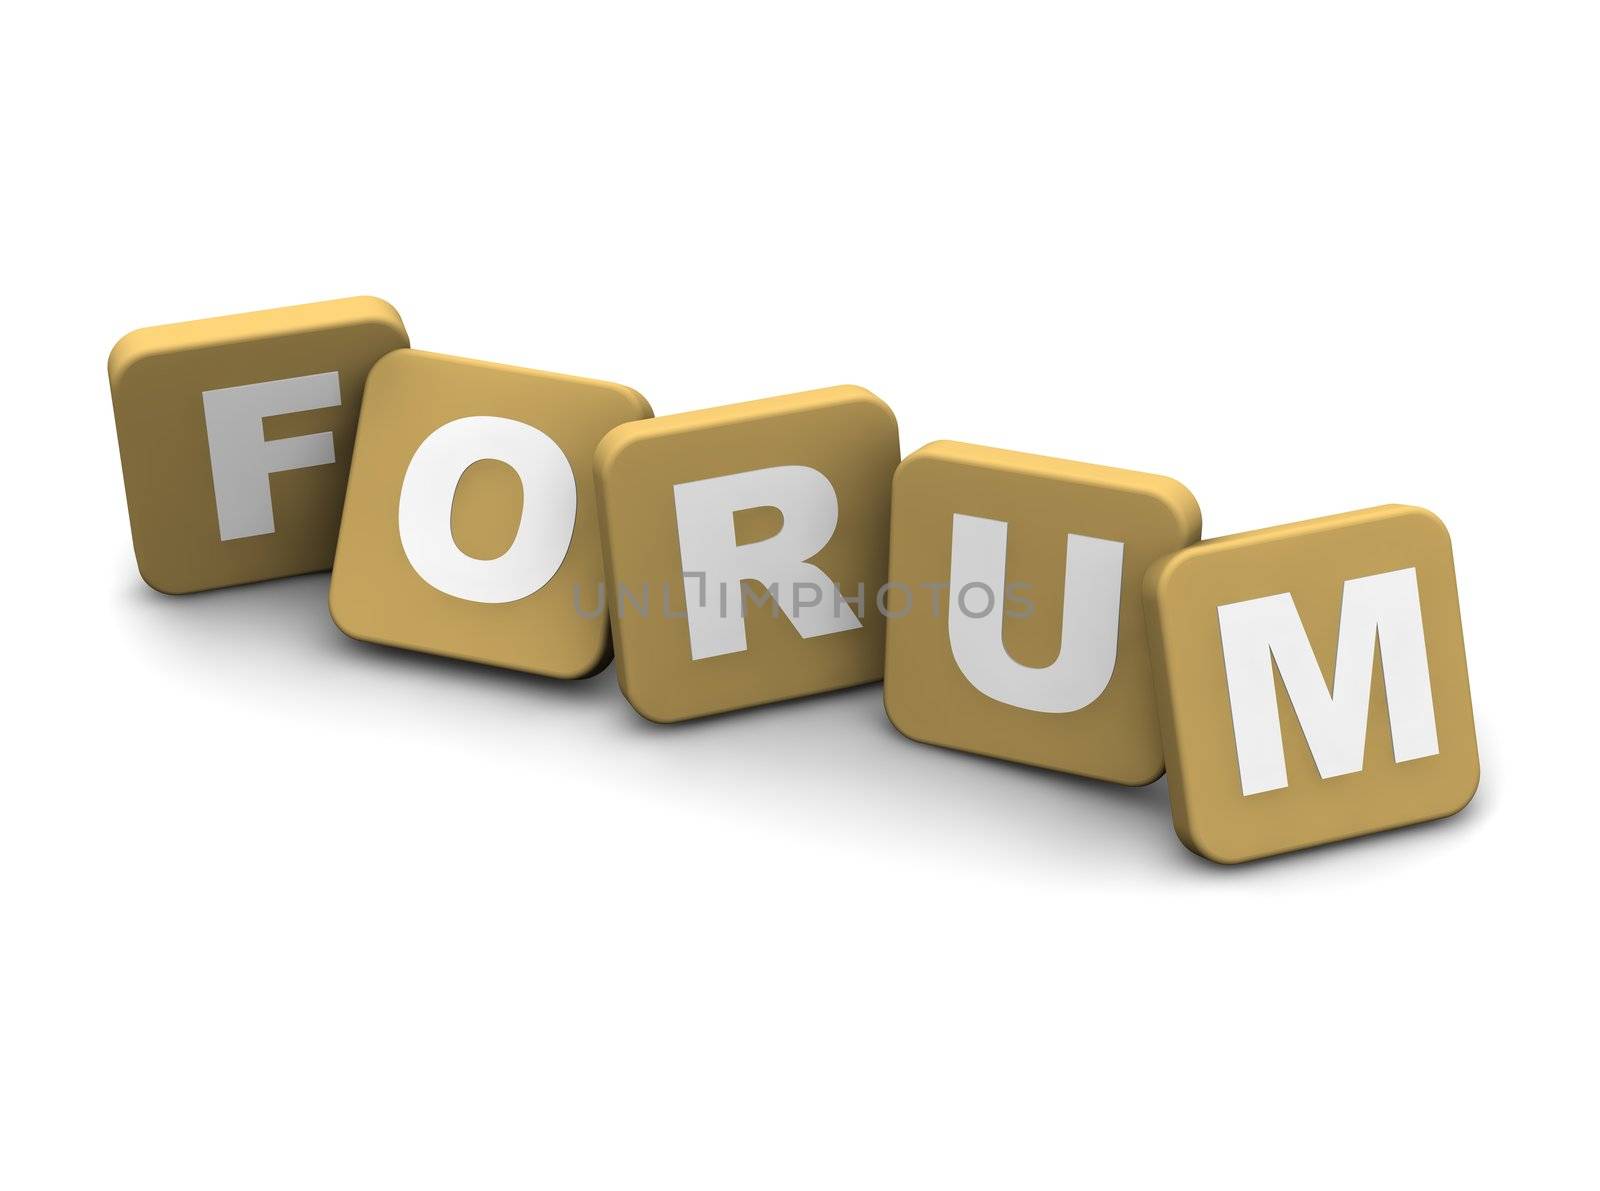 Forum text. 3d rendered illustration isolated on white.